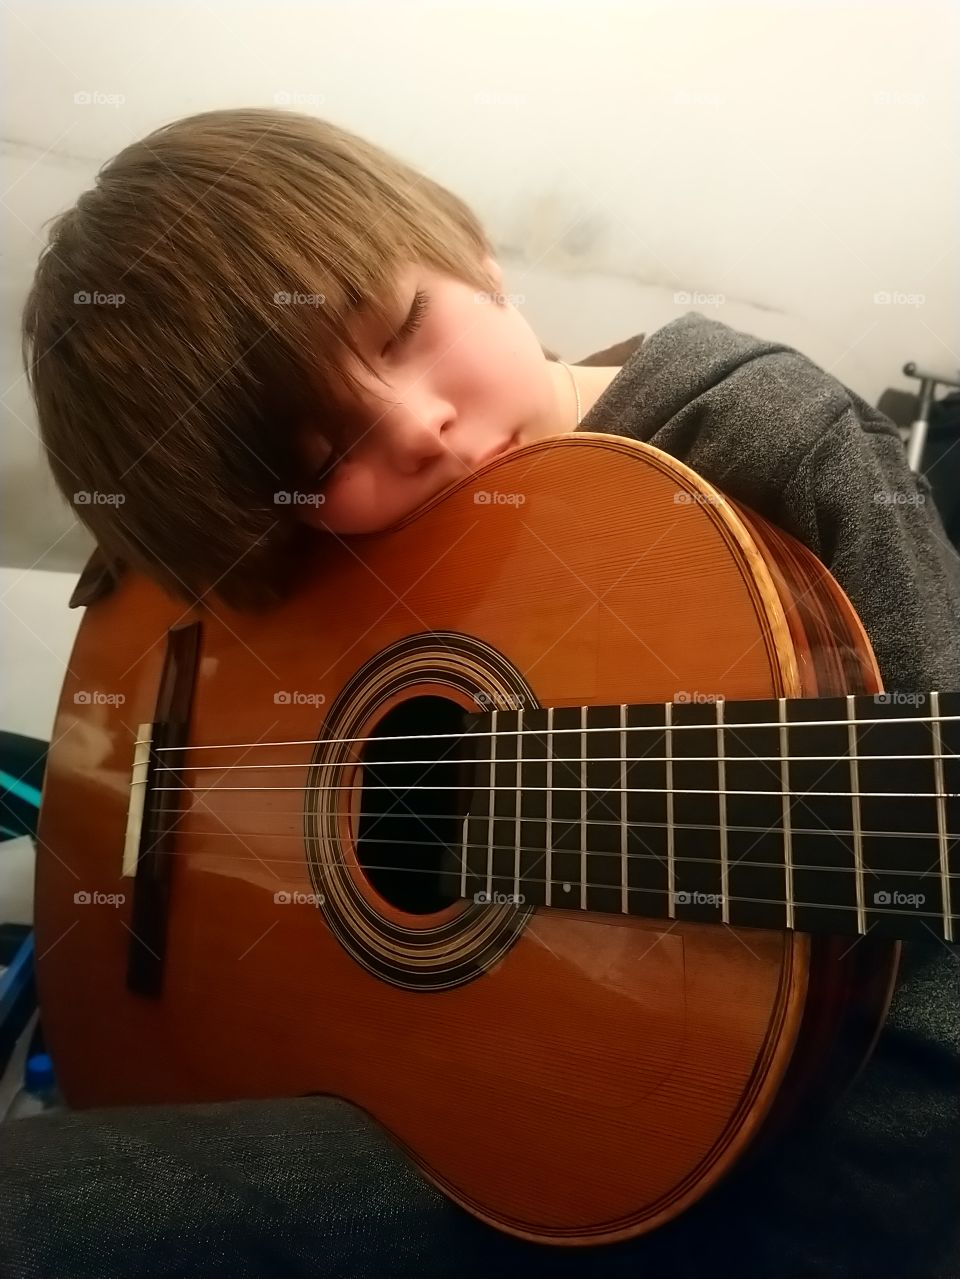 After exhausting playing the guitar